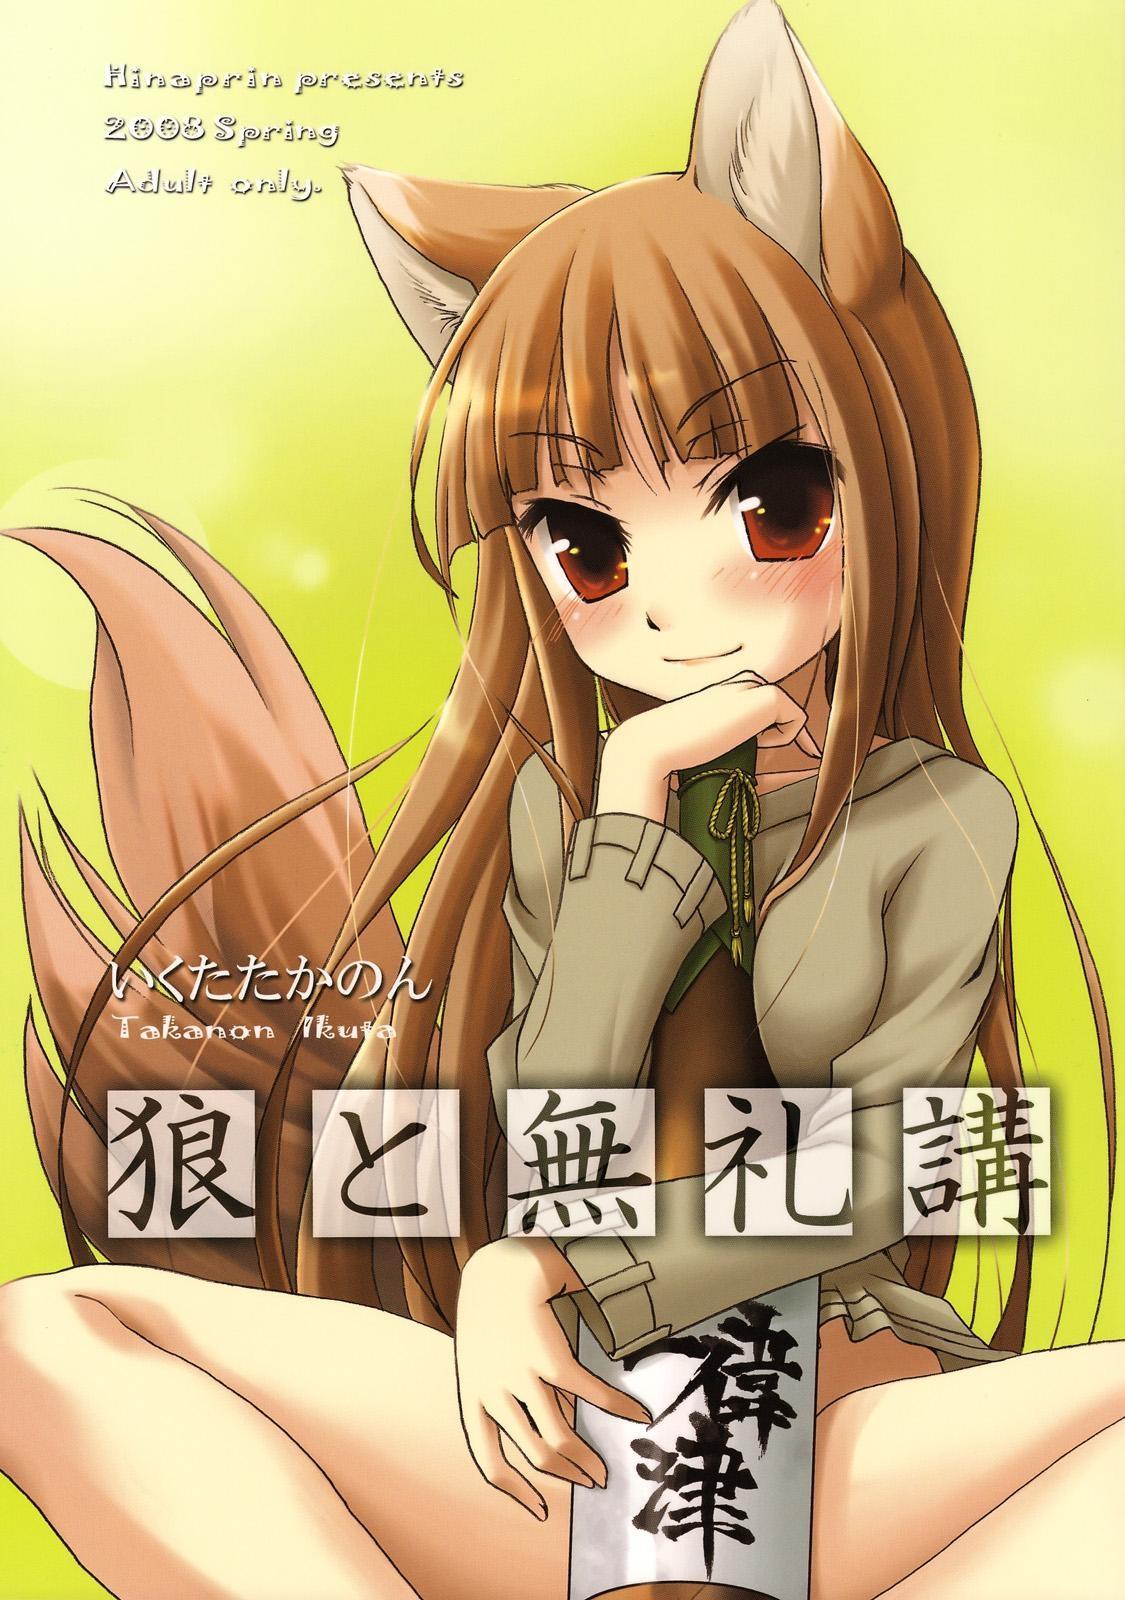 Lingerie Okami to Bureikou - Spice and wolf Sloppy - Picture 1